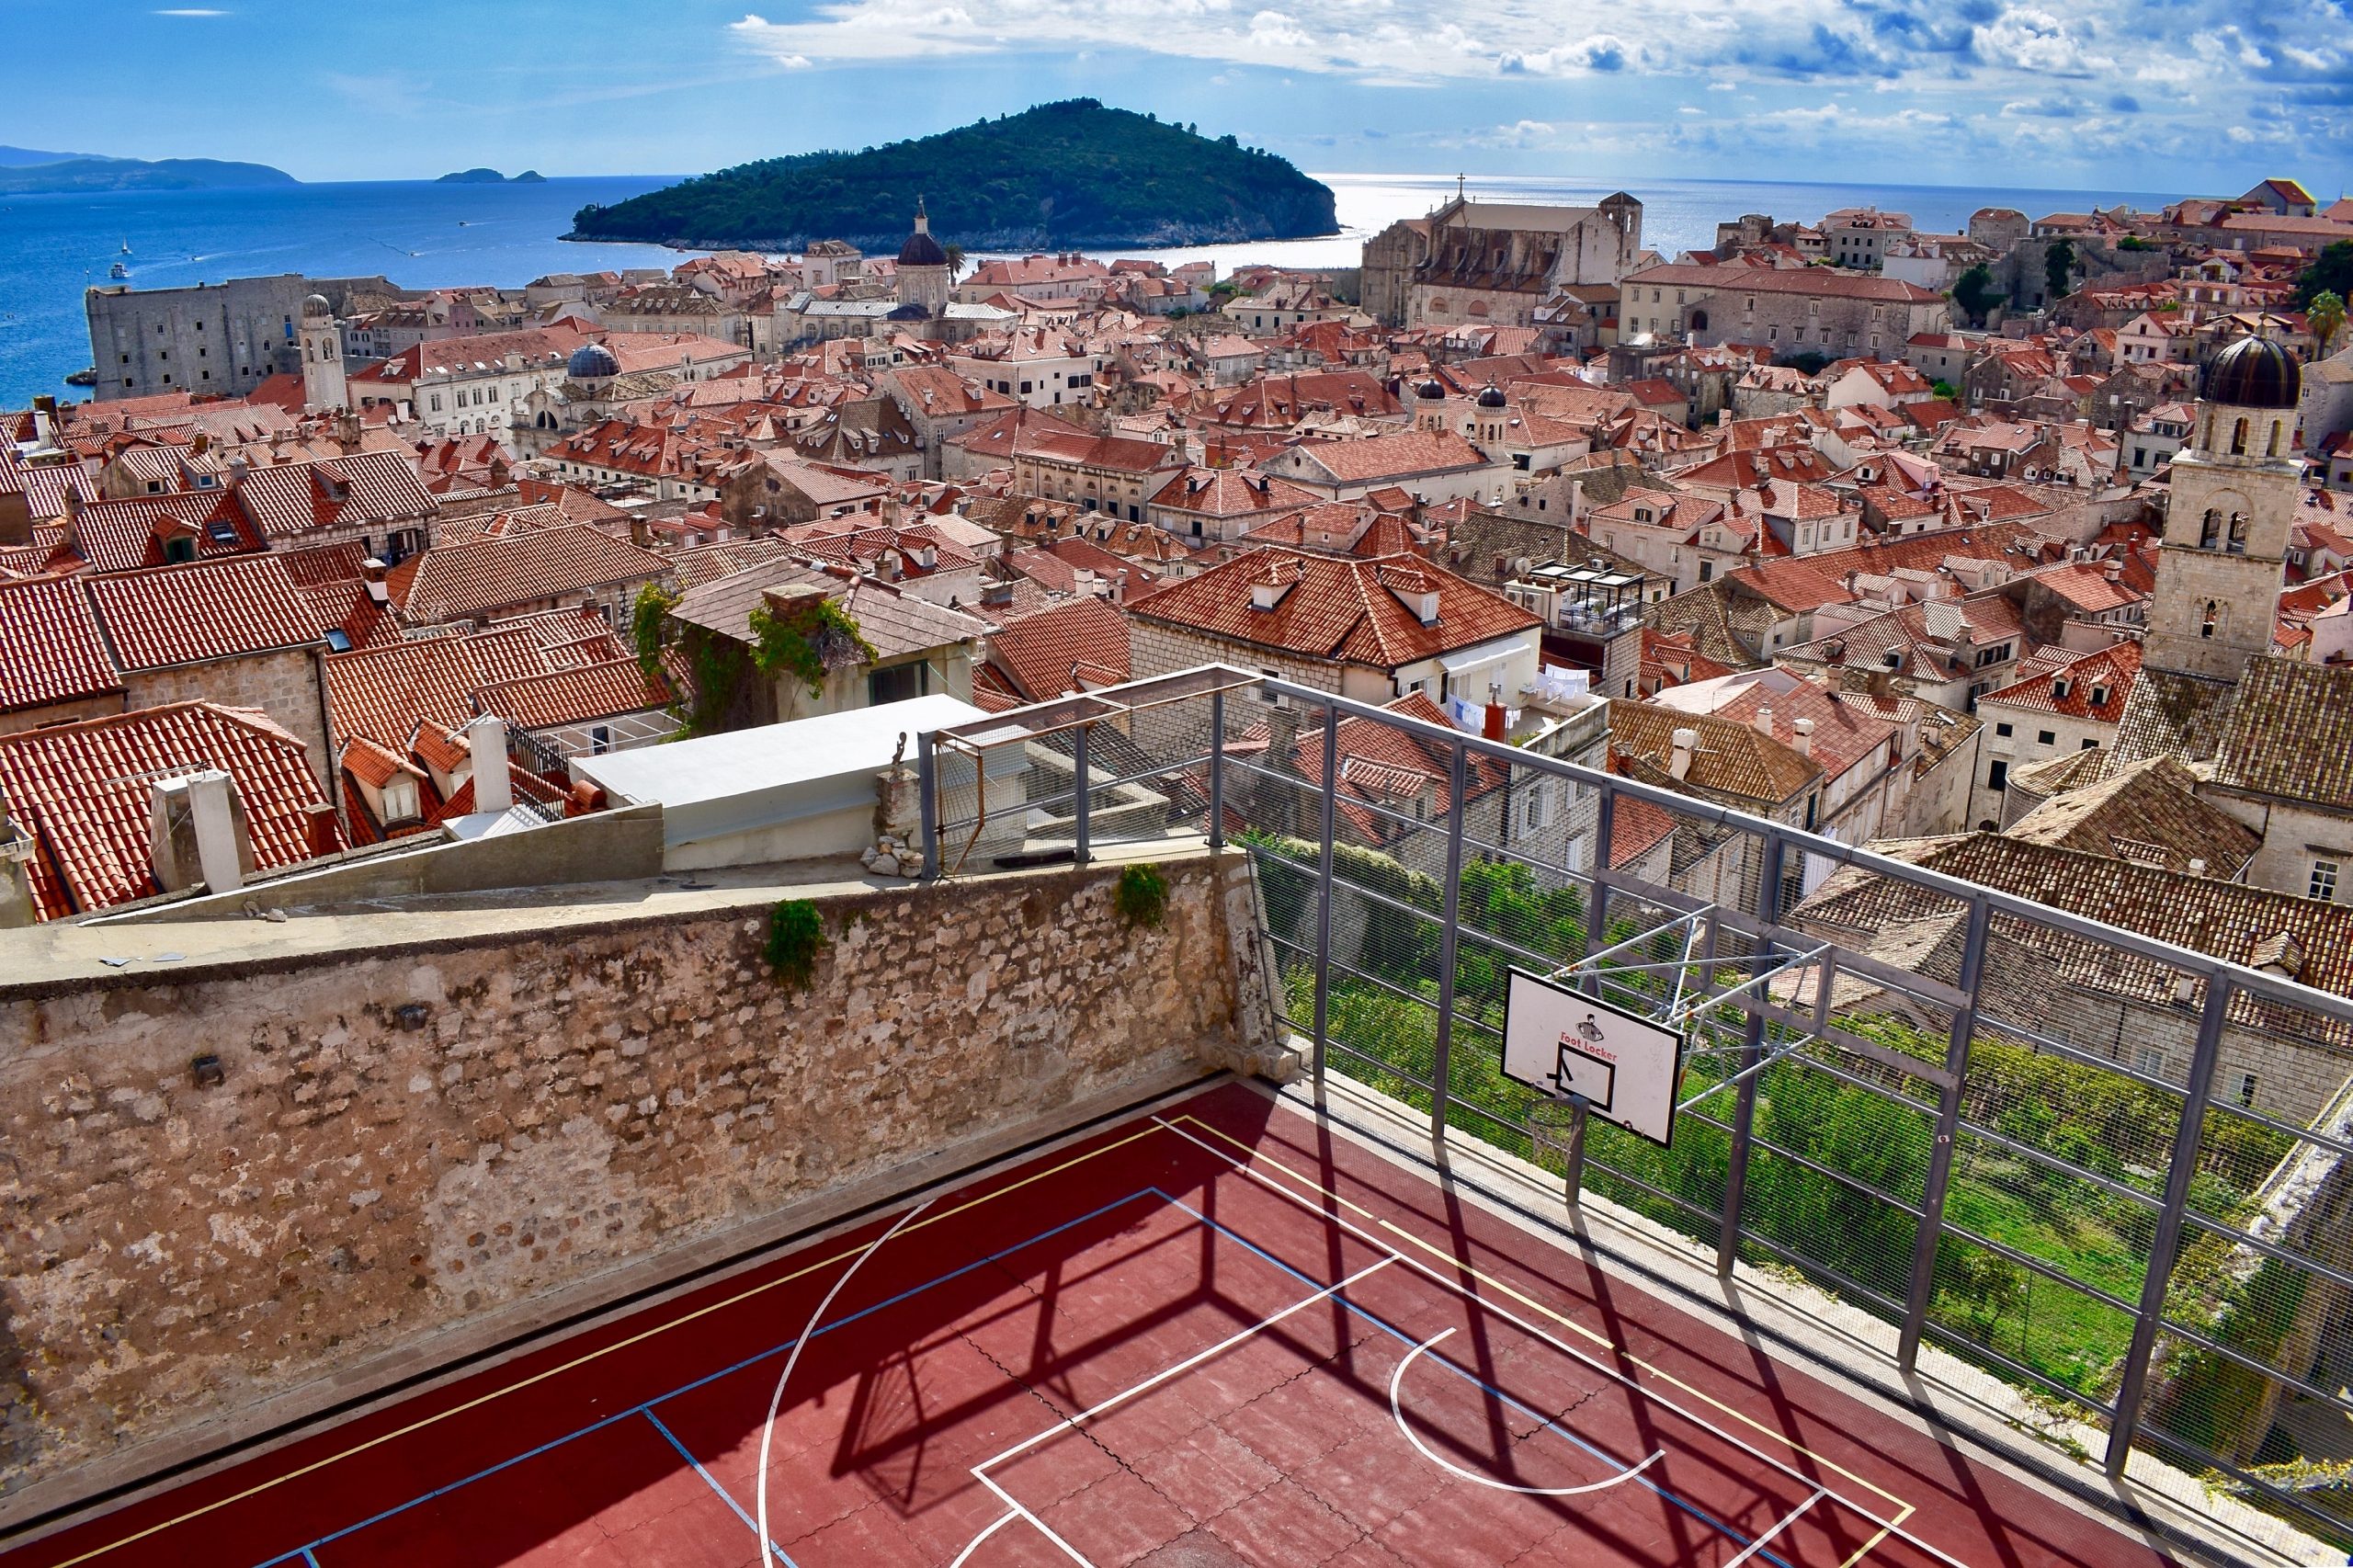 Potentially the most beautiful basketball court on Earth - Dubrovnik